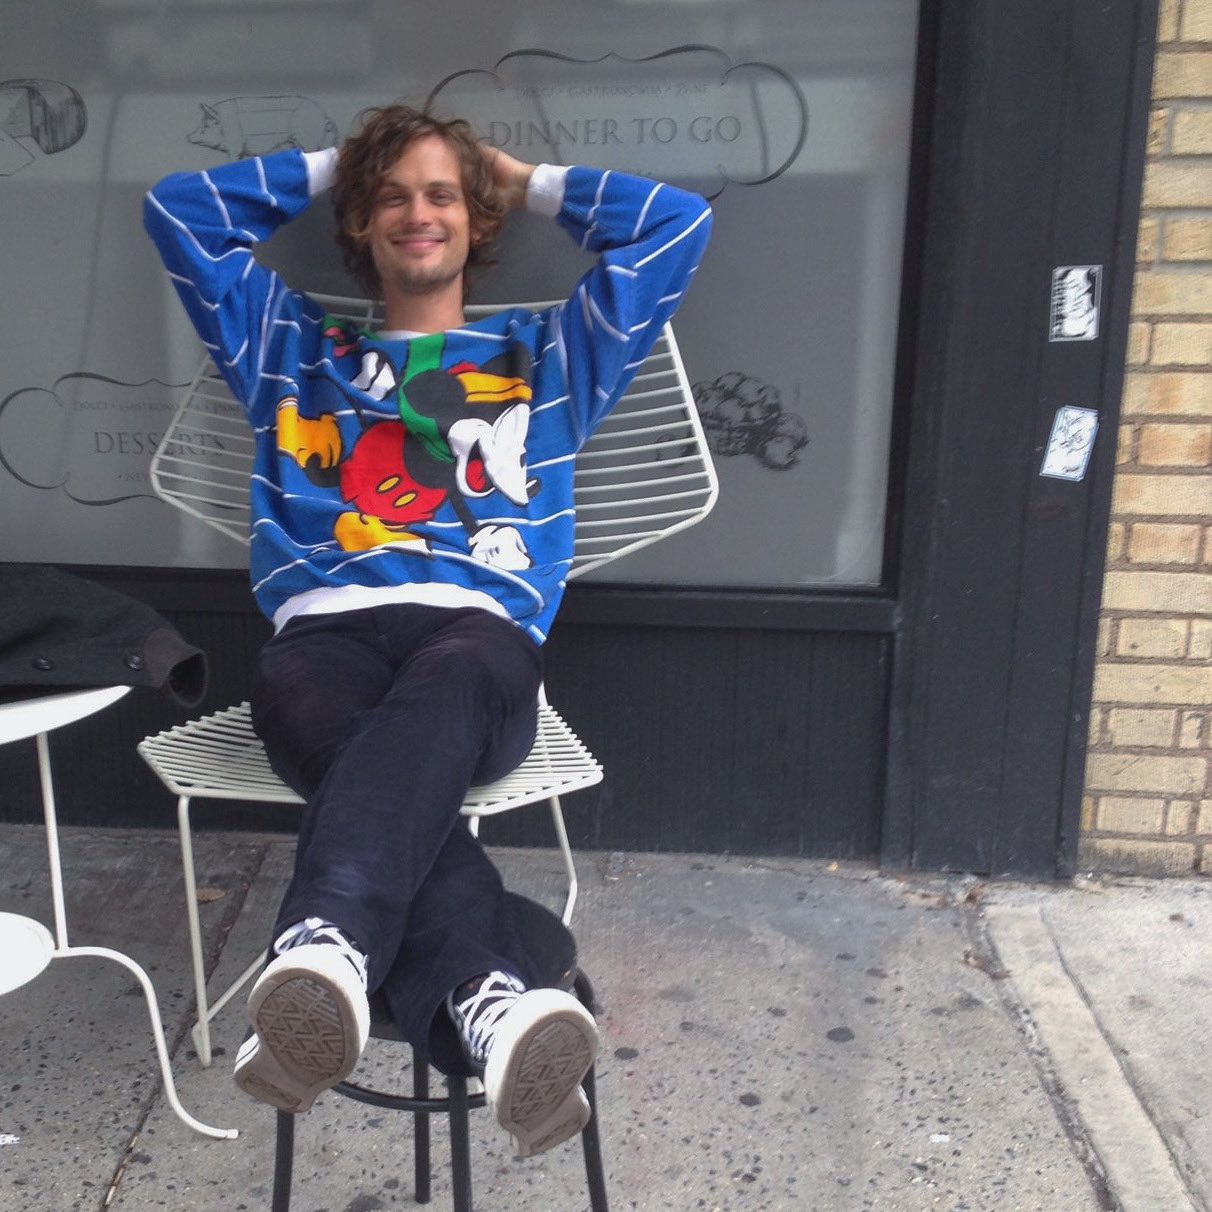 Happy Birthday Matthew Gray Gubler!!!
I can\t believe that you are 41 now!
I hope you have a good year:) 